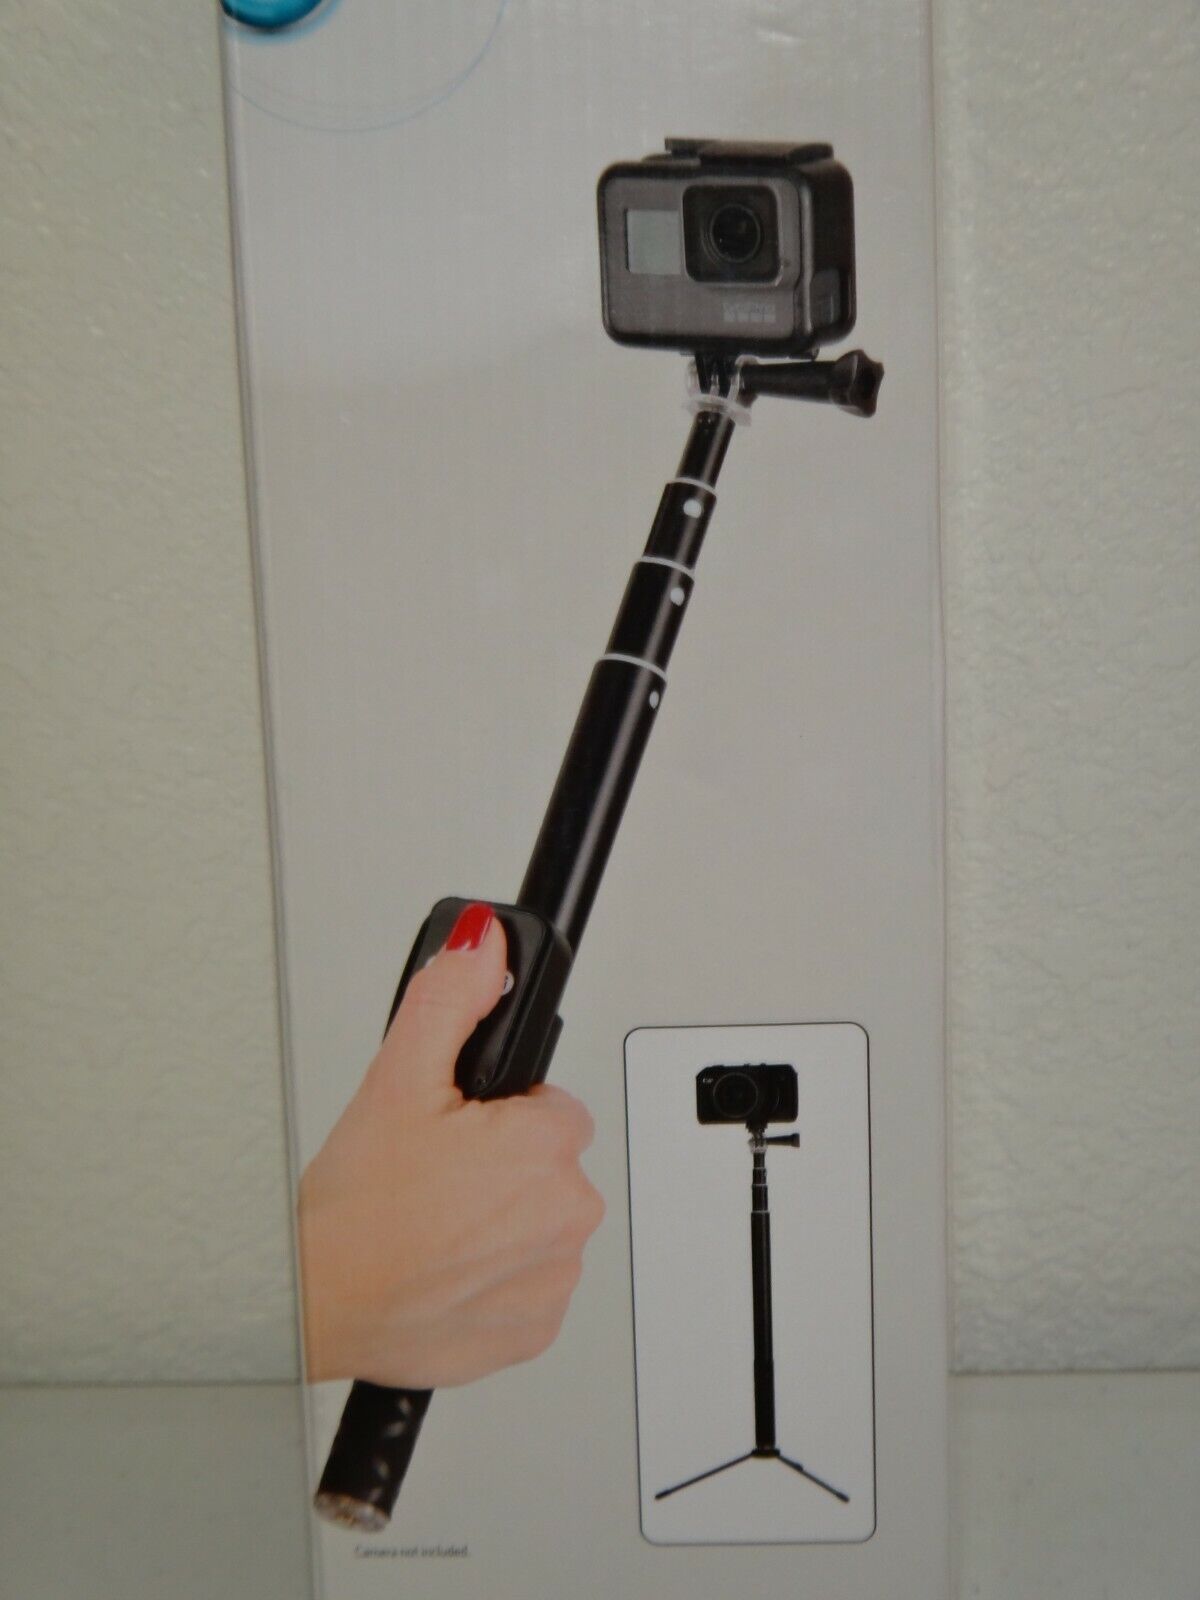 ONN Black SELFIE STICK For Compact & Action Cameras Extends 11.75 in- 40 in +BOX